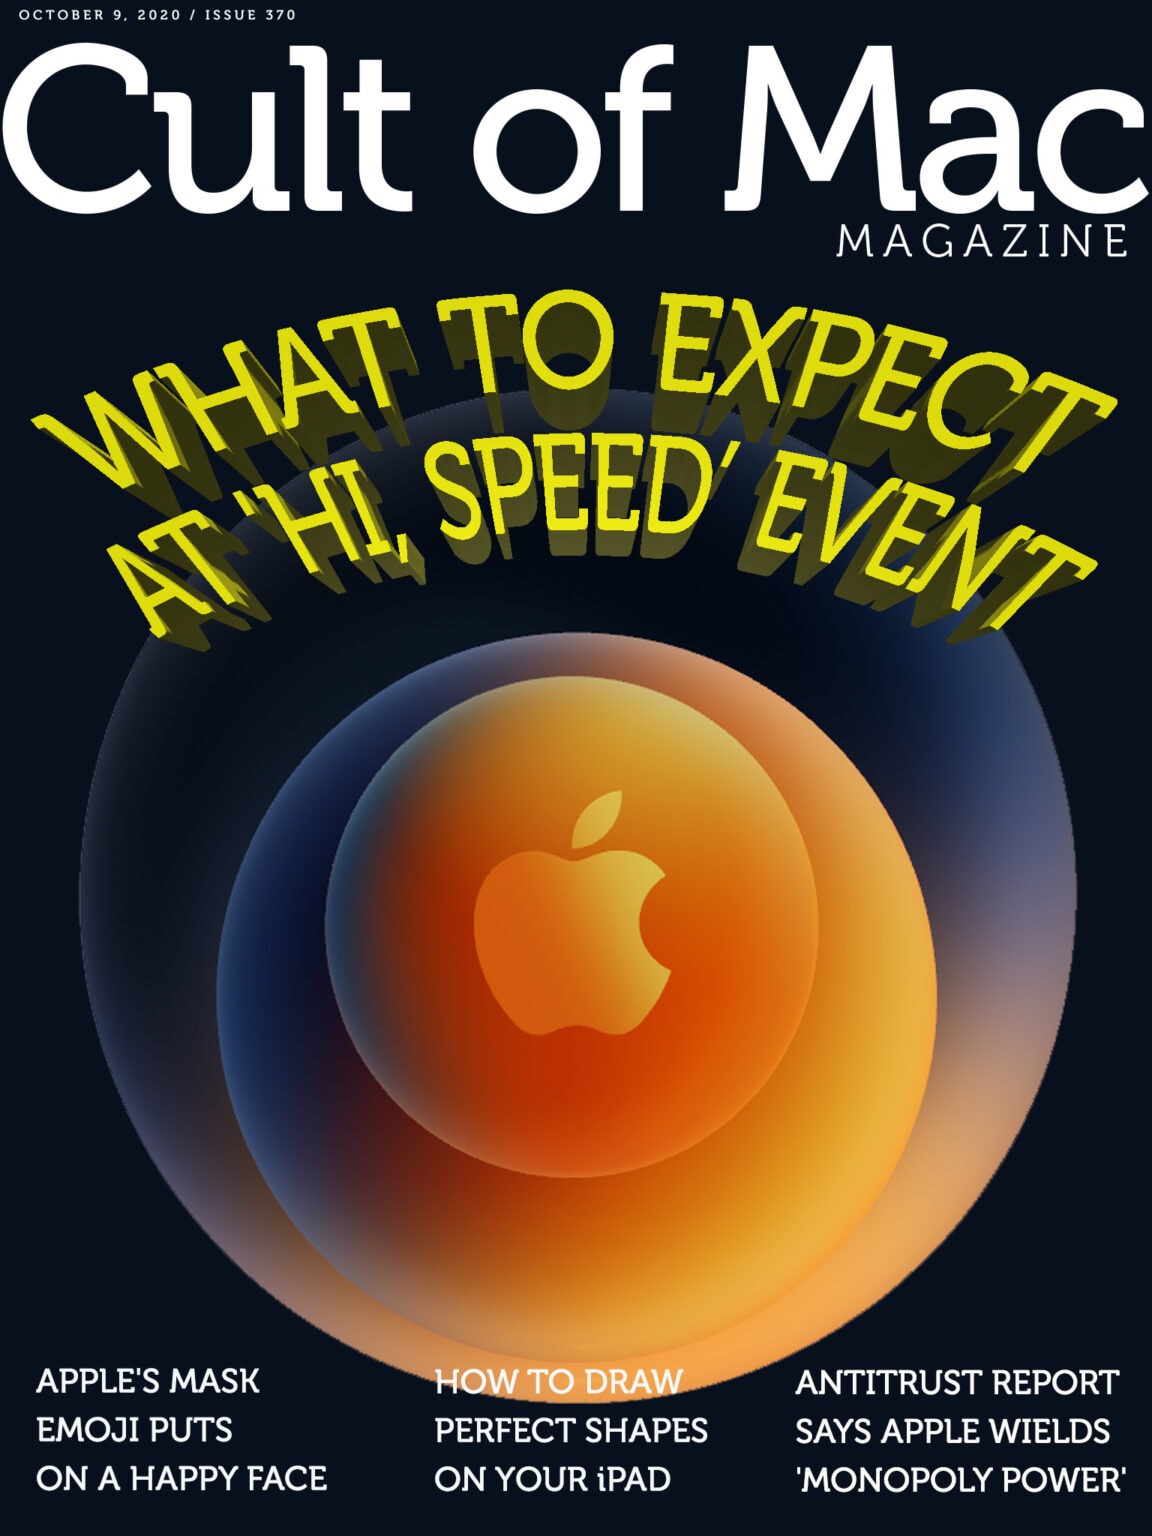 Apple Hi, Speed event preview: Get a sneak peek at what's popping out of Apple's magic pipeline next week.